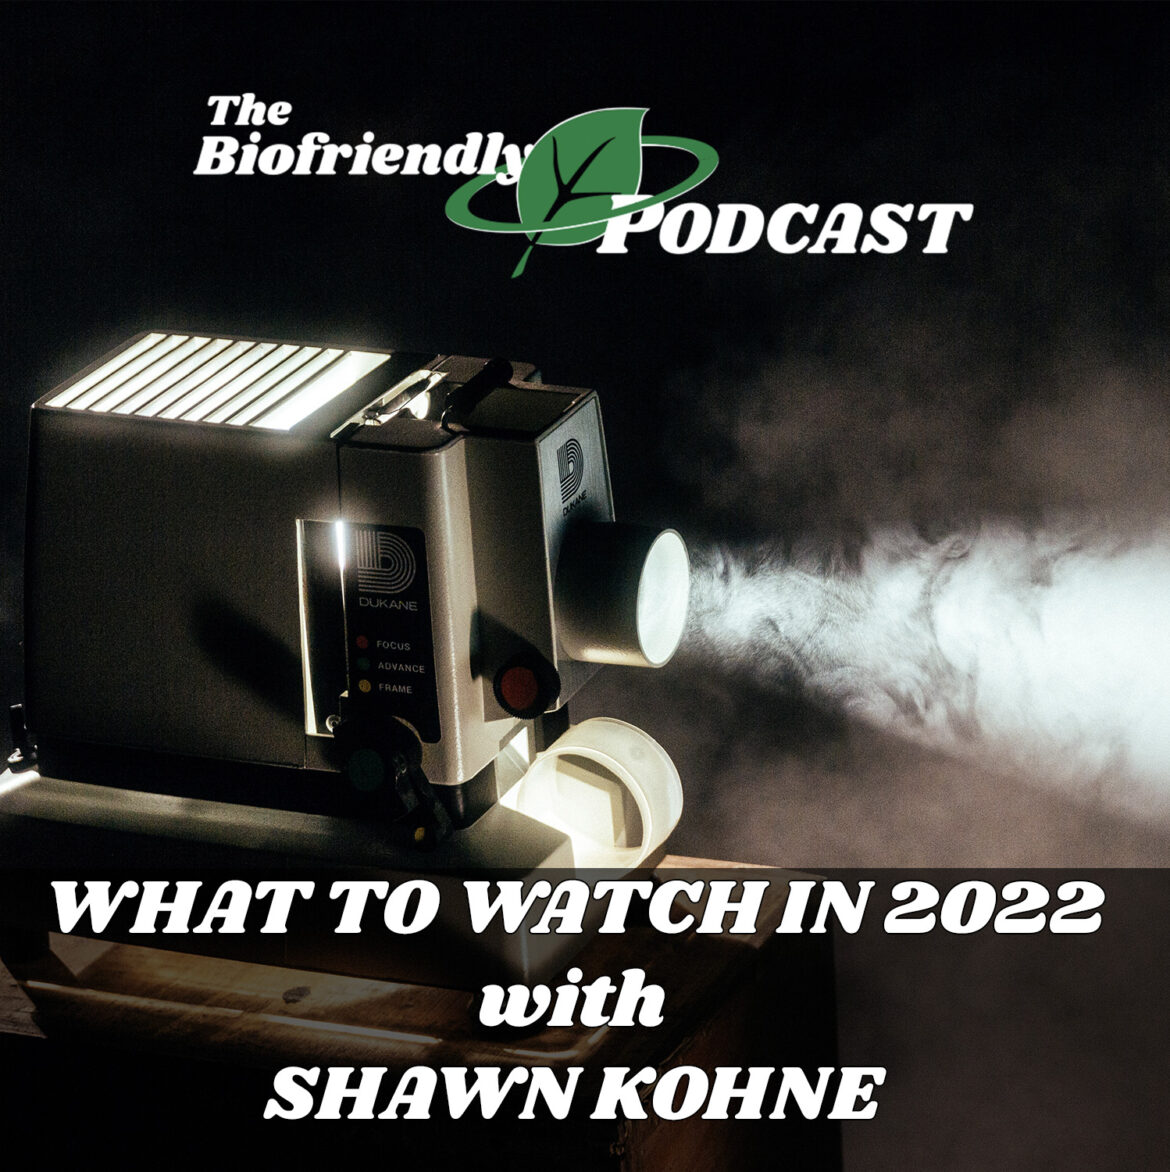 What to Watch in 2022 with Shawn Kohne